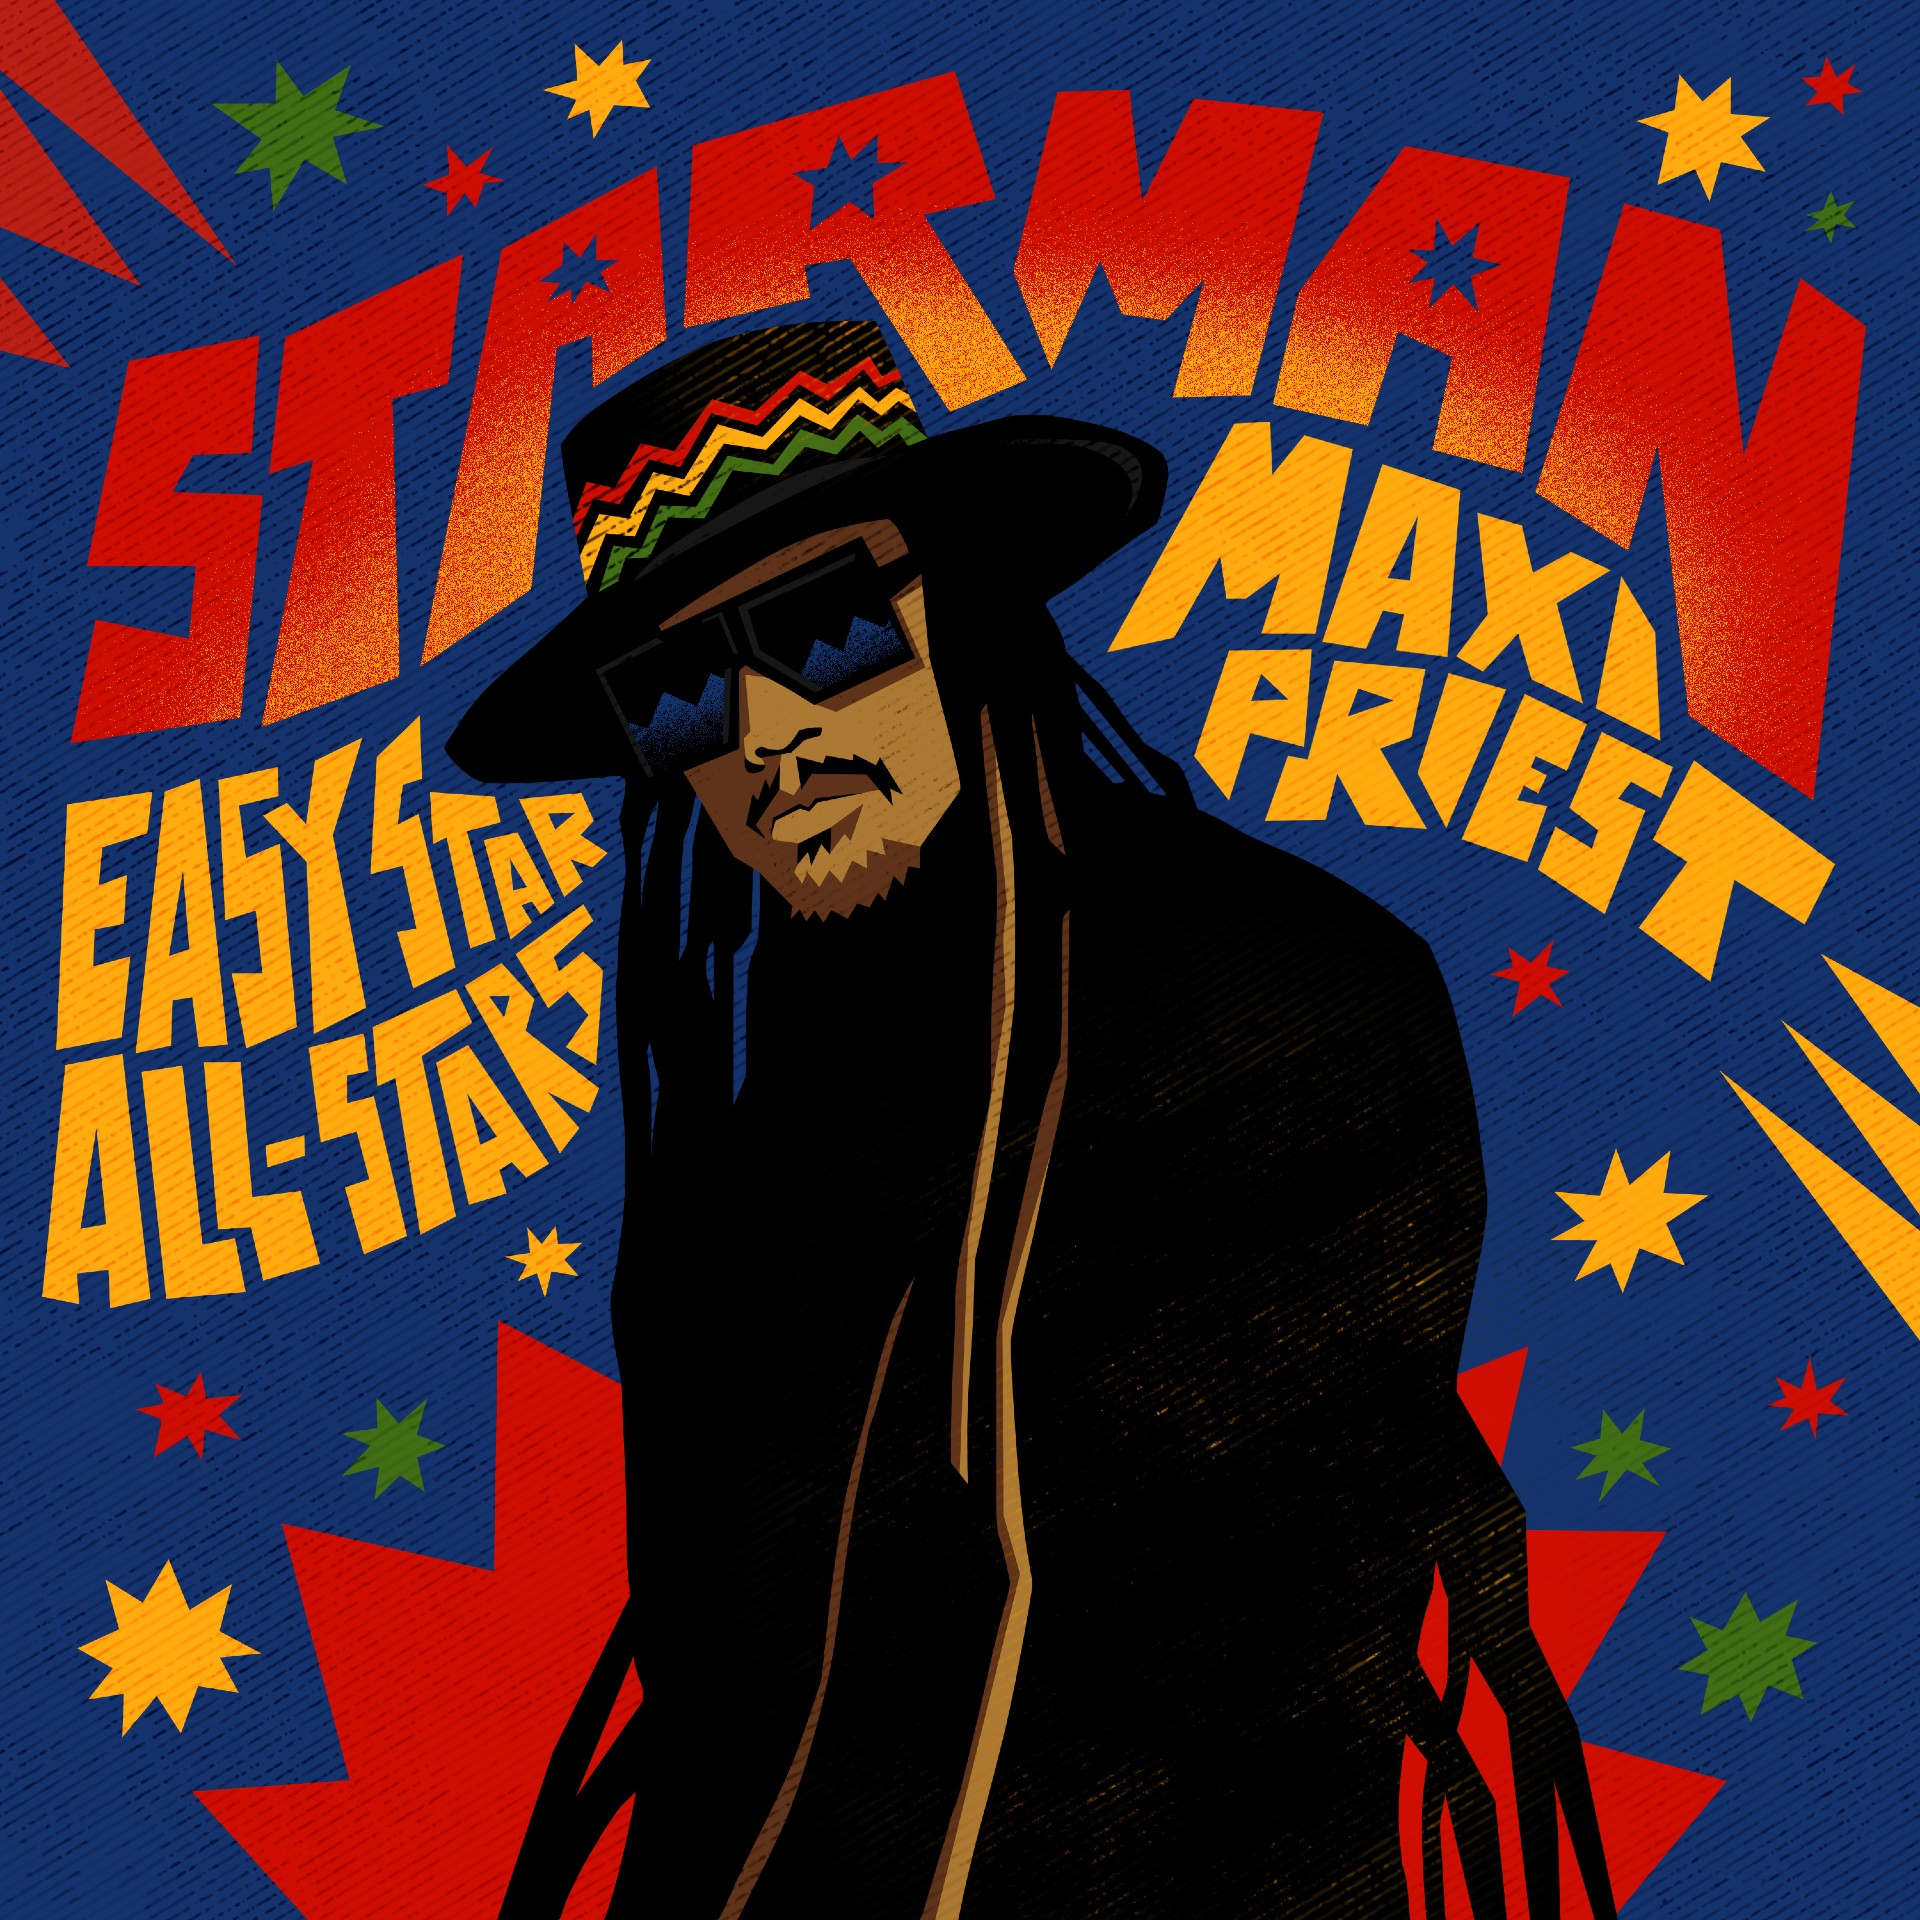 Artwork for the single “Starman” by Easy Star All-Stars